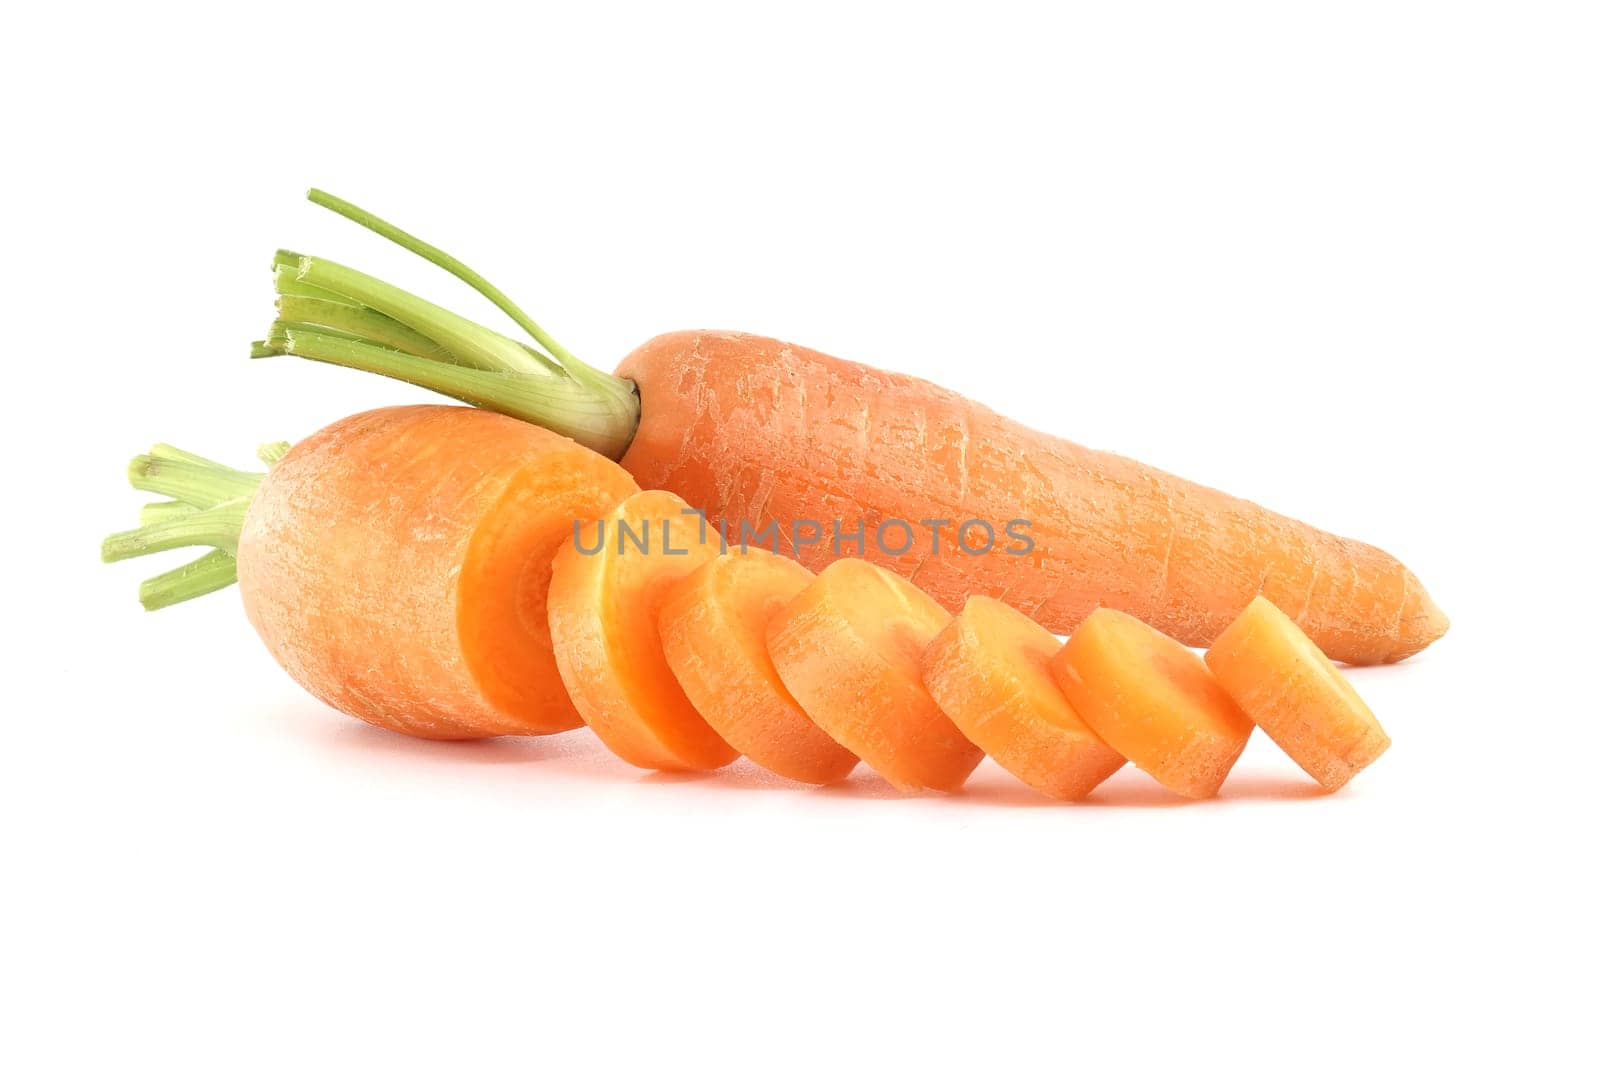 Whole carrot alongside its sliced pieces over white background by NetPix